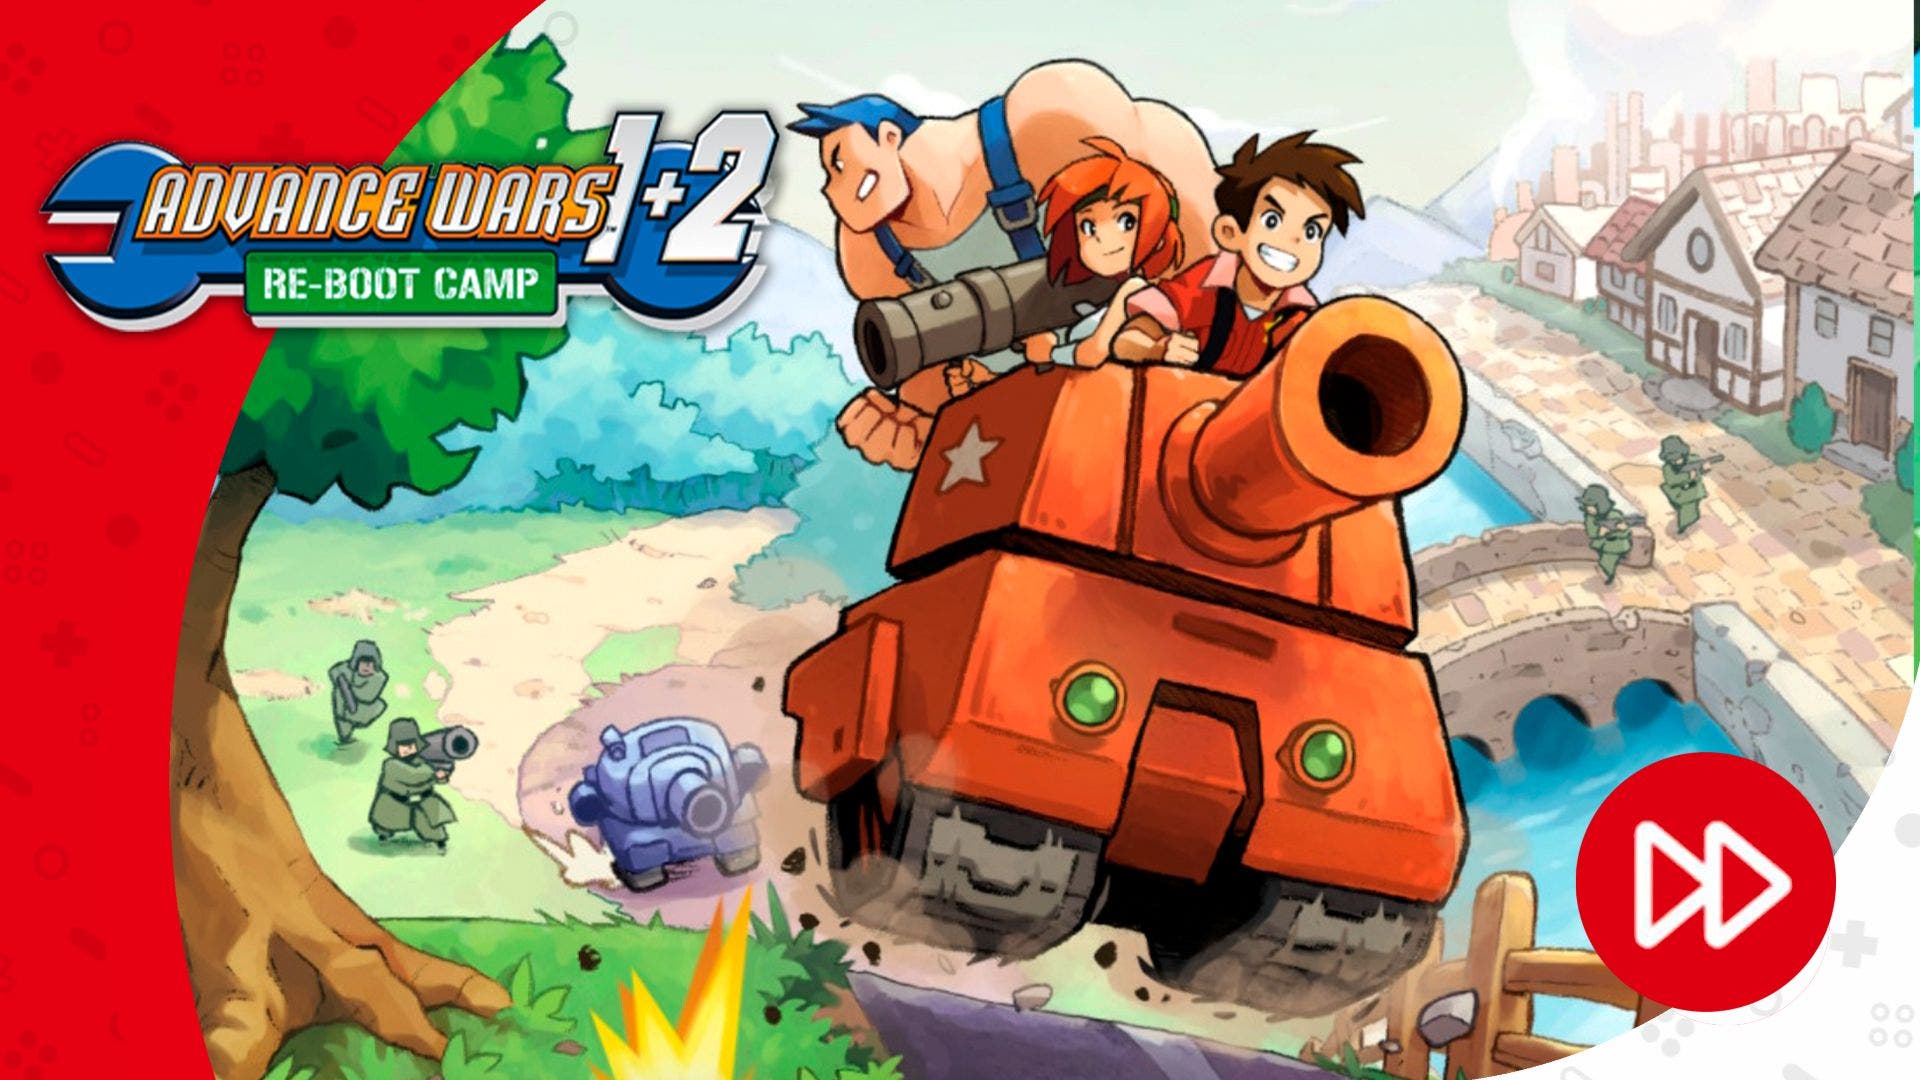 [Impresiones] Advance Wars 1+2: Re-Boot Camp para Nintendo Switch